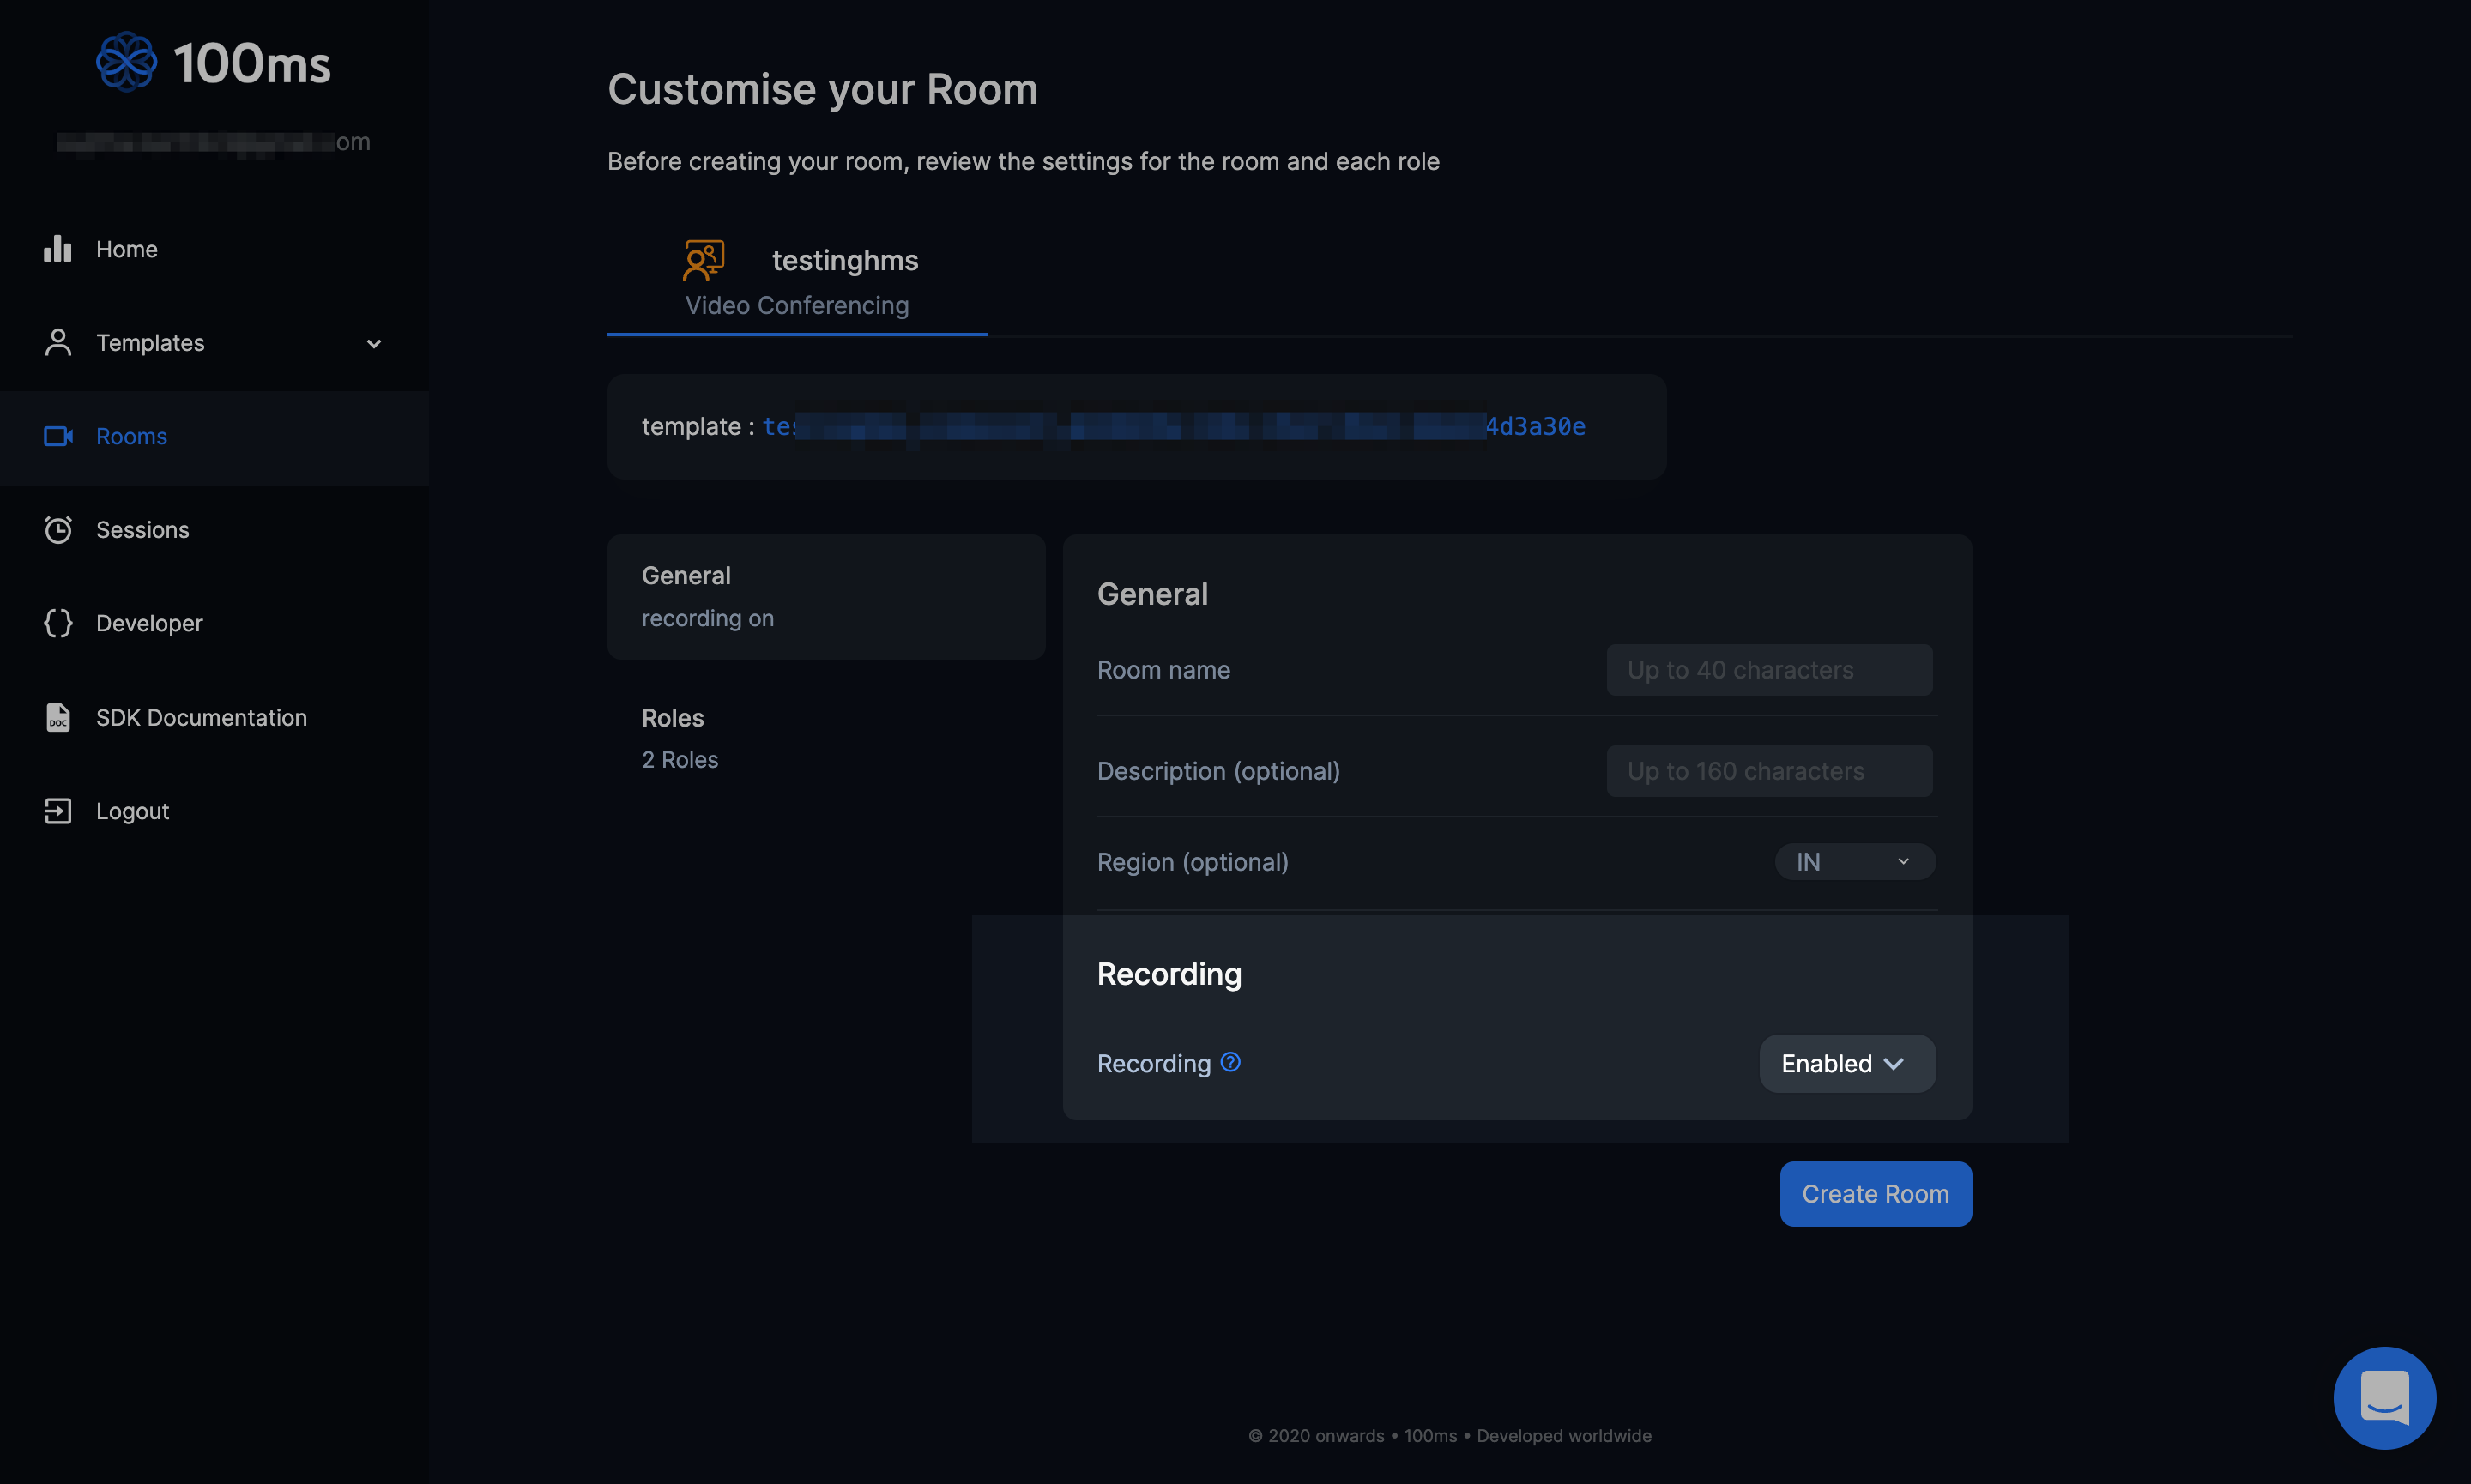 Enable recording when creating a room